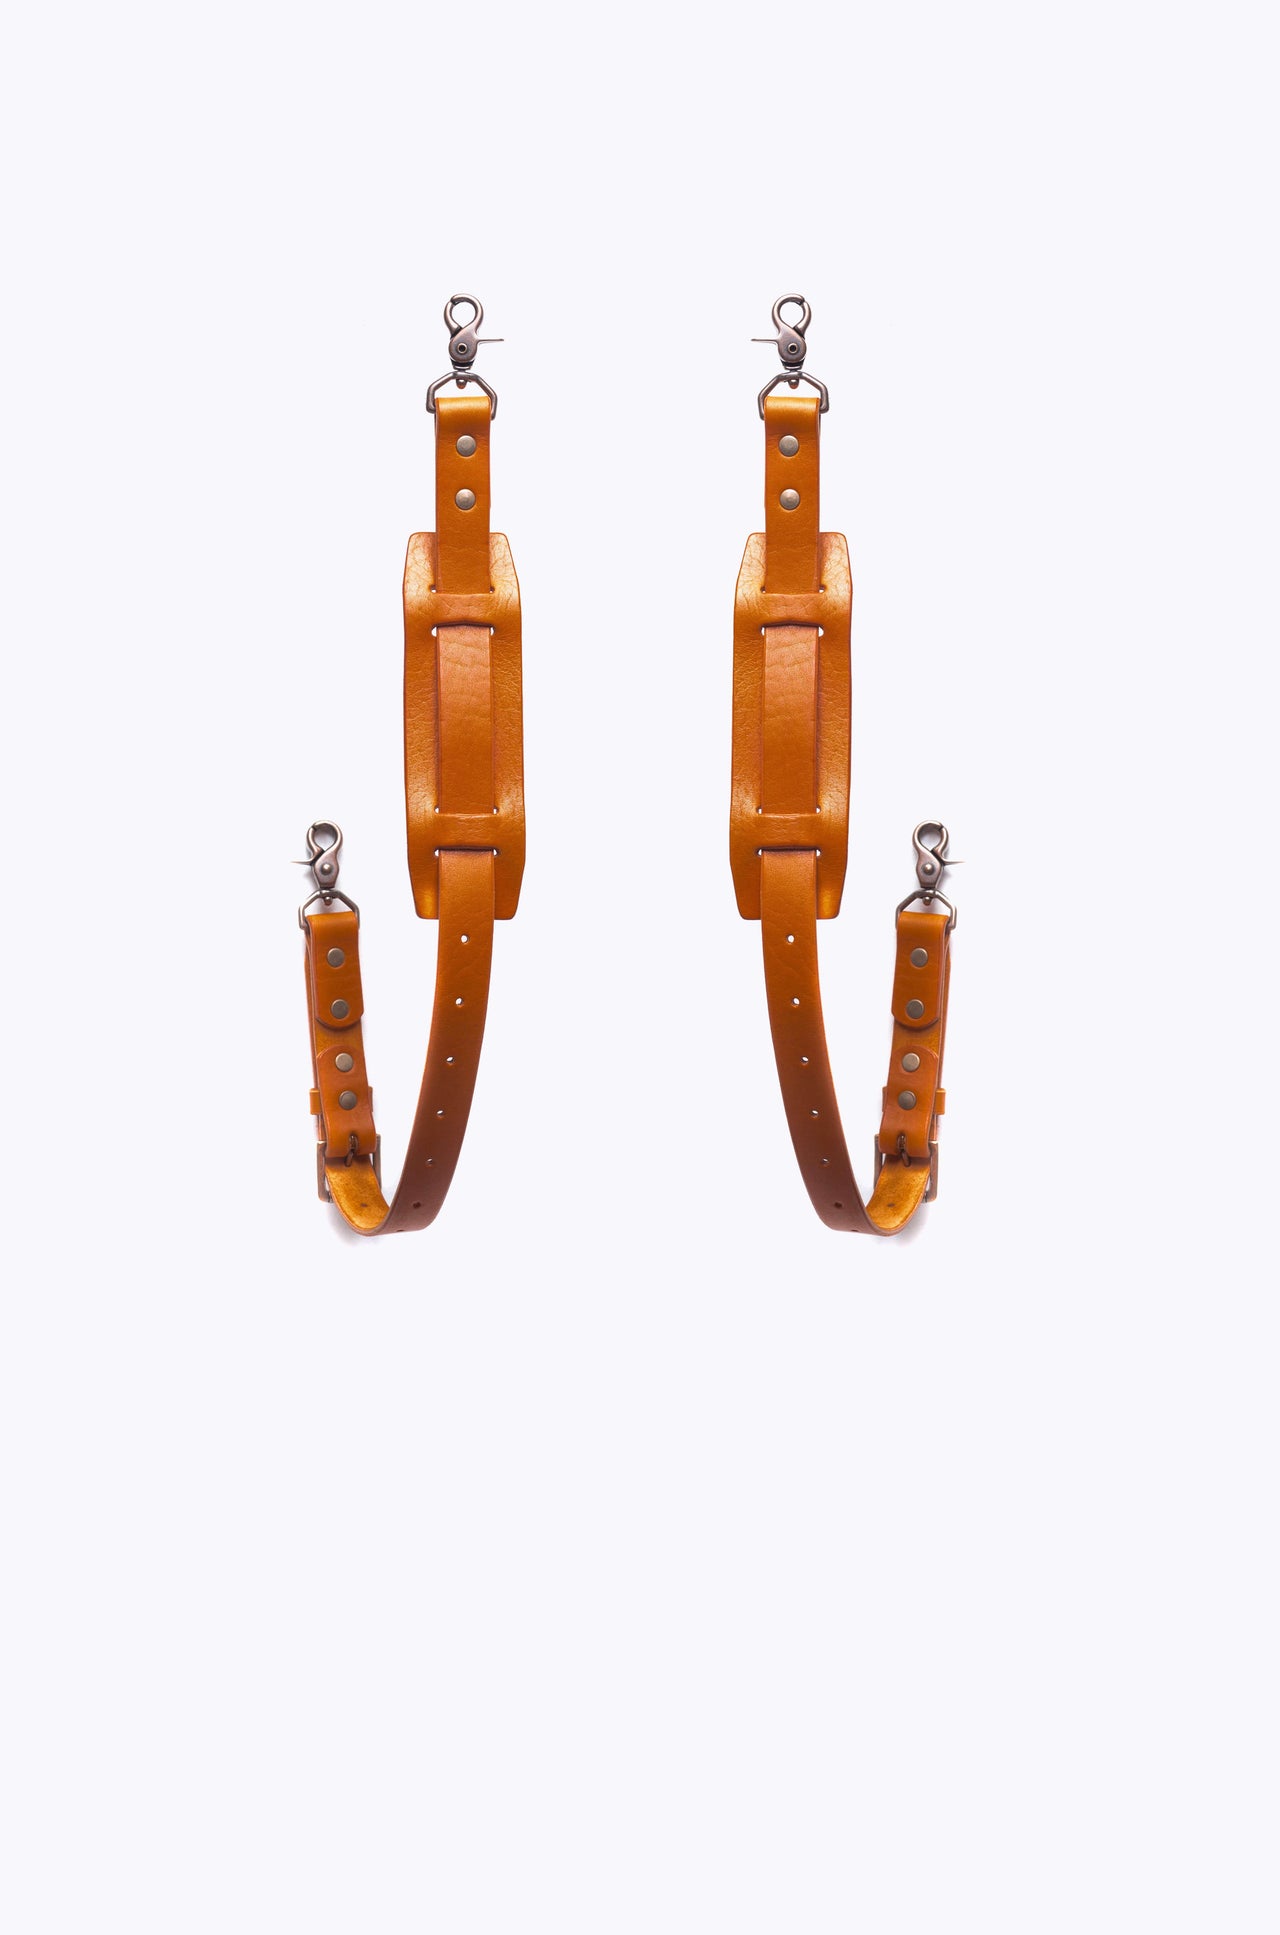 BennyBee Leather Backpack Straps Cognac